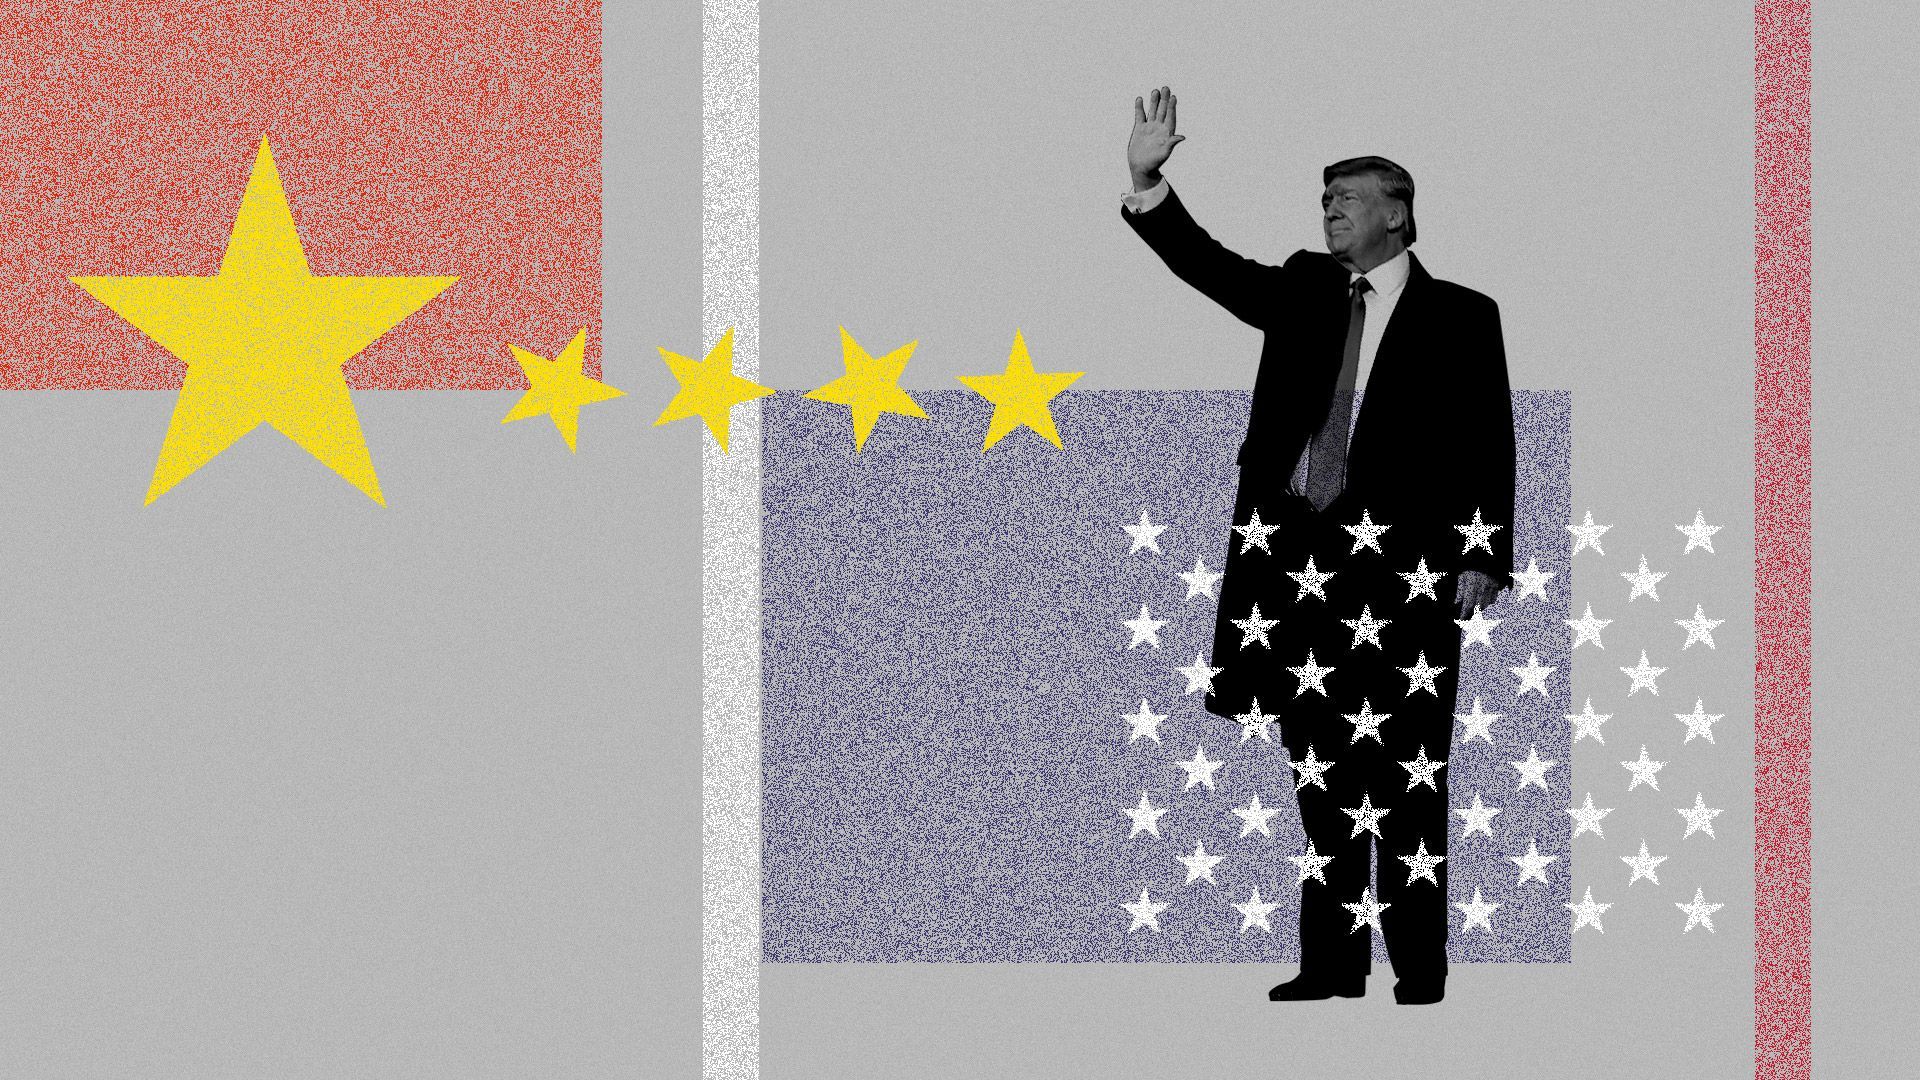 Donald Trump standing among deconstructed Chinese and American flags